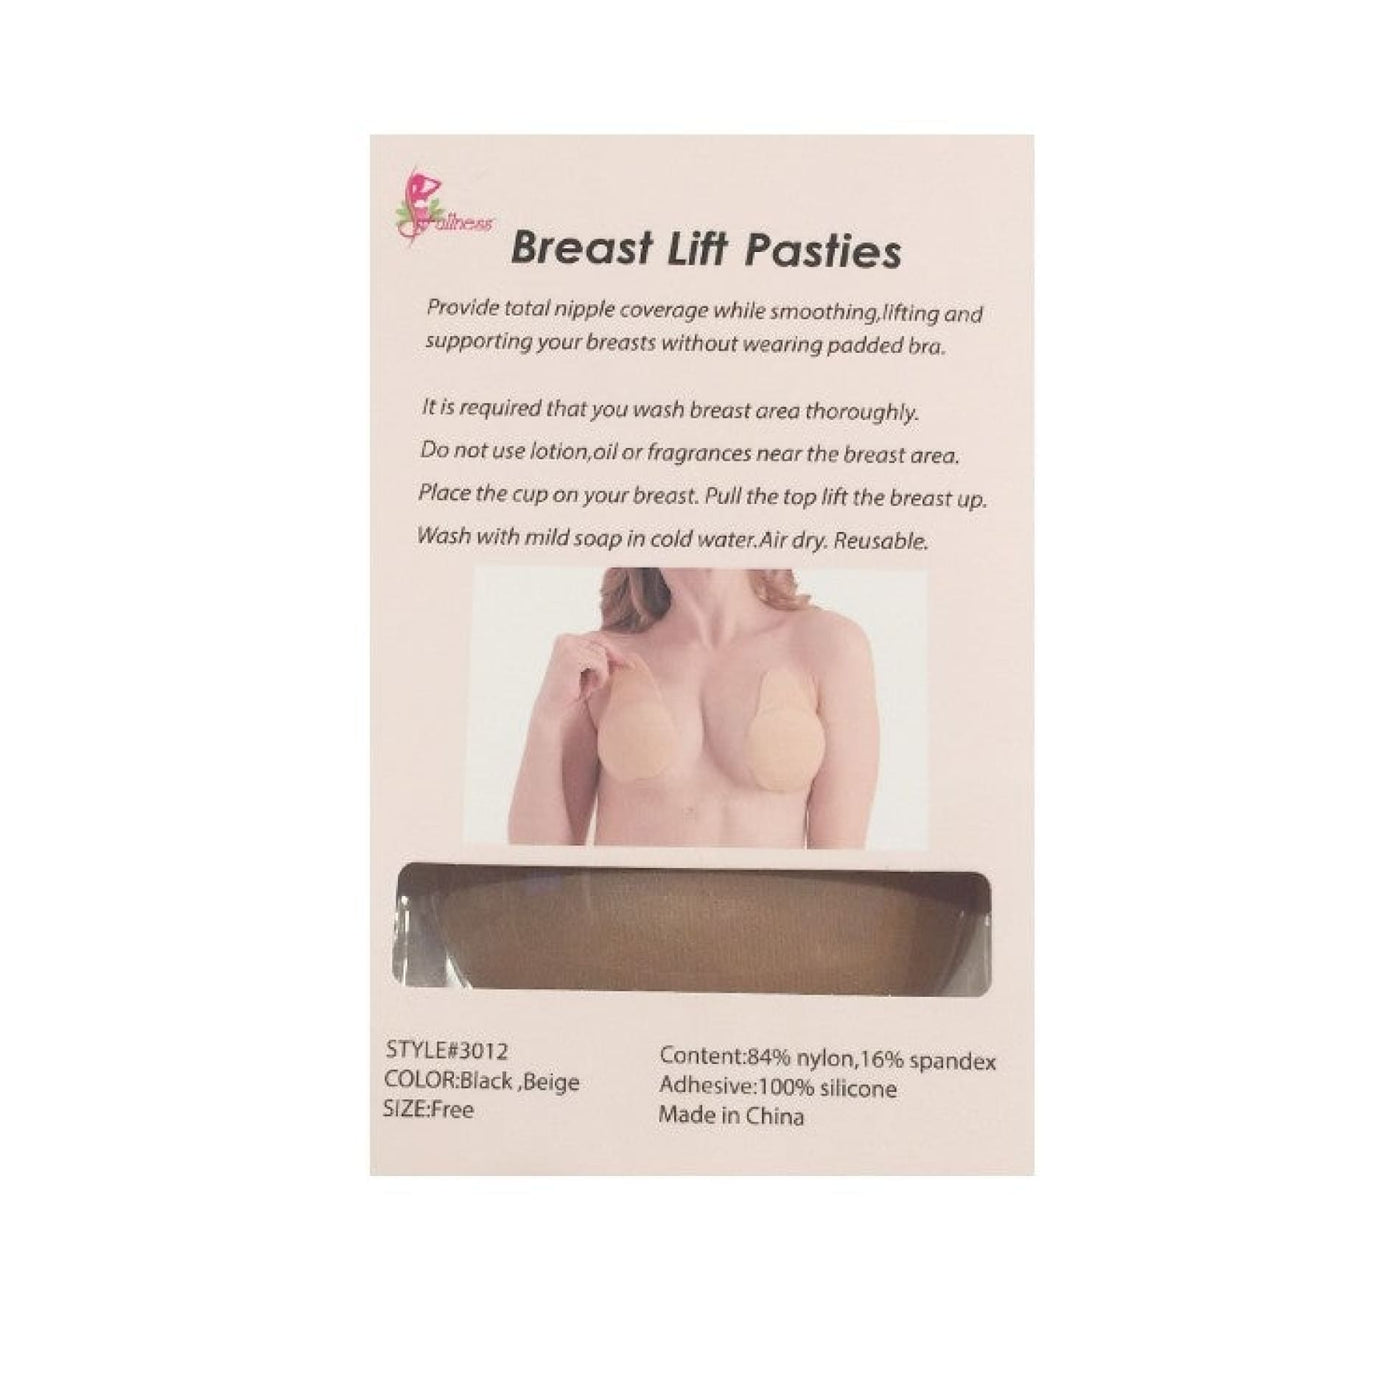 Fabric Breast Lift Pasties - Accessories